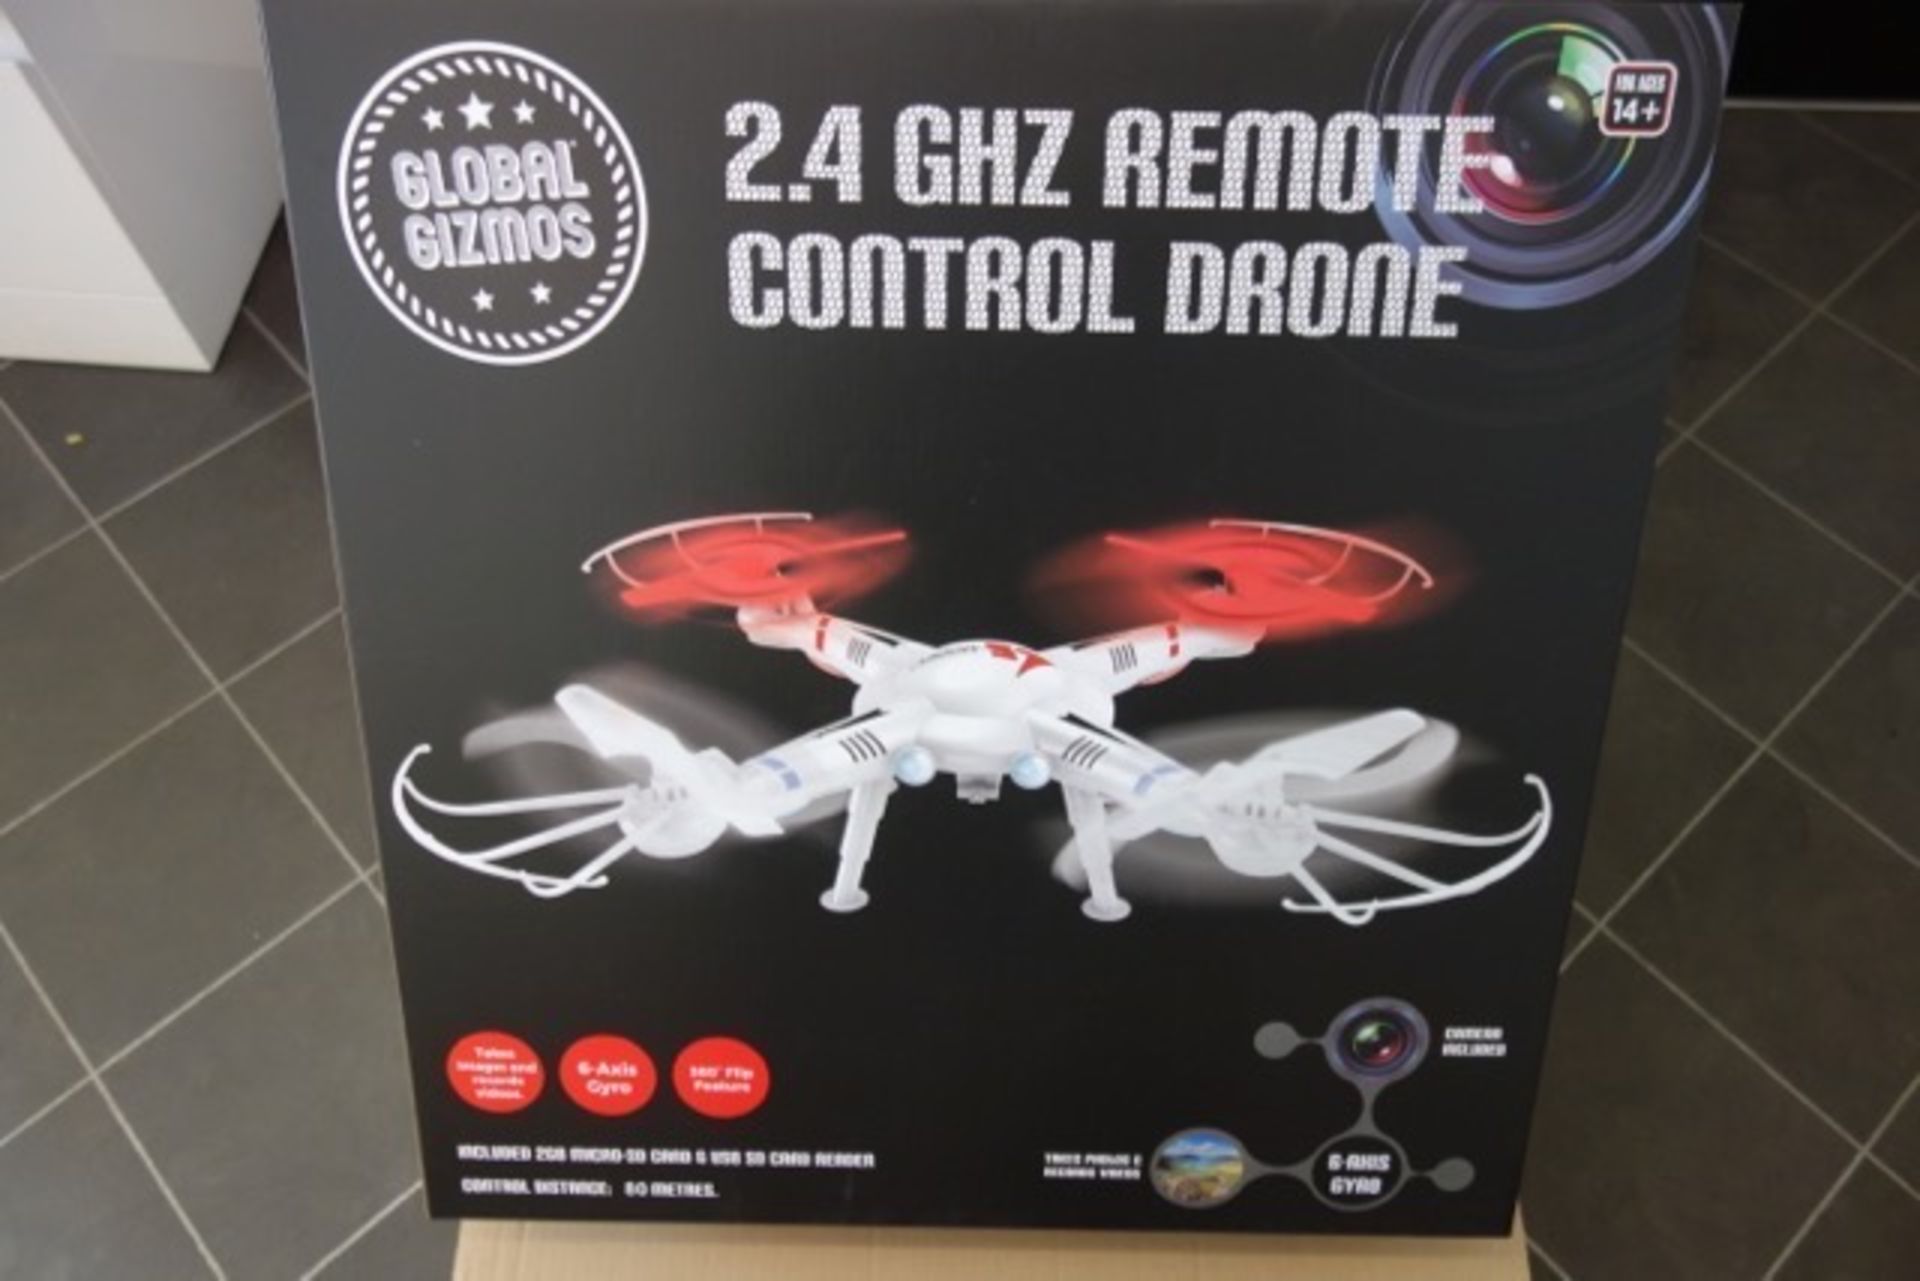 1 x Brand New Global Gizmos 2.4GHZ Remote Control Drone. Takes images & records videos - Image 4 of 4